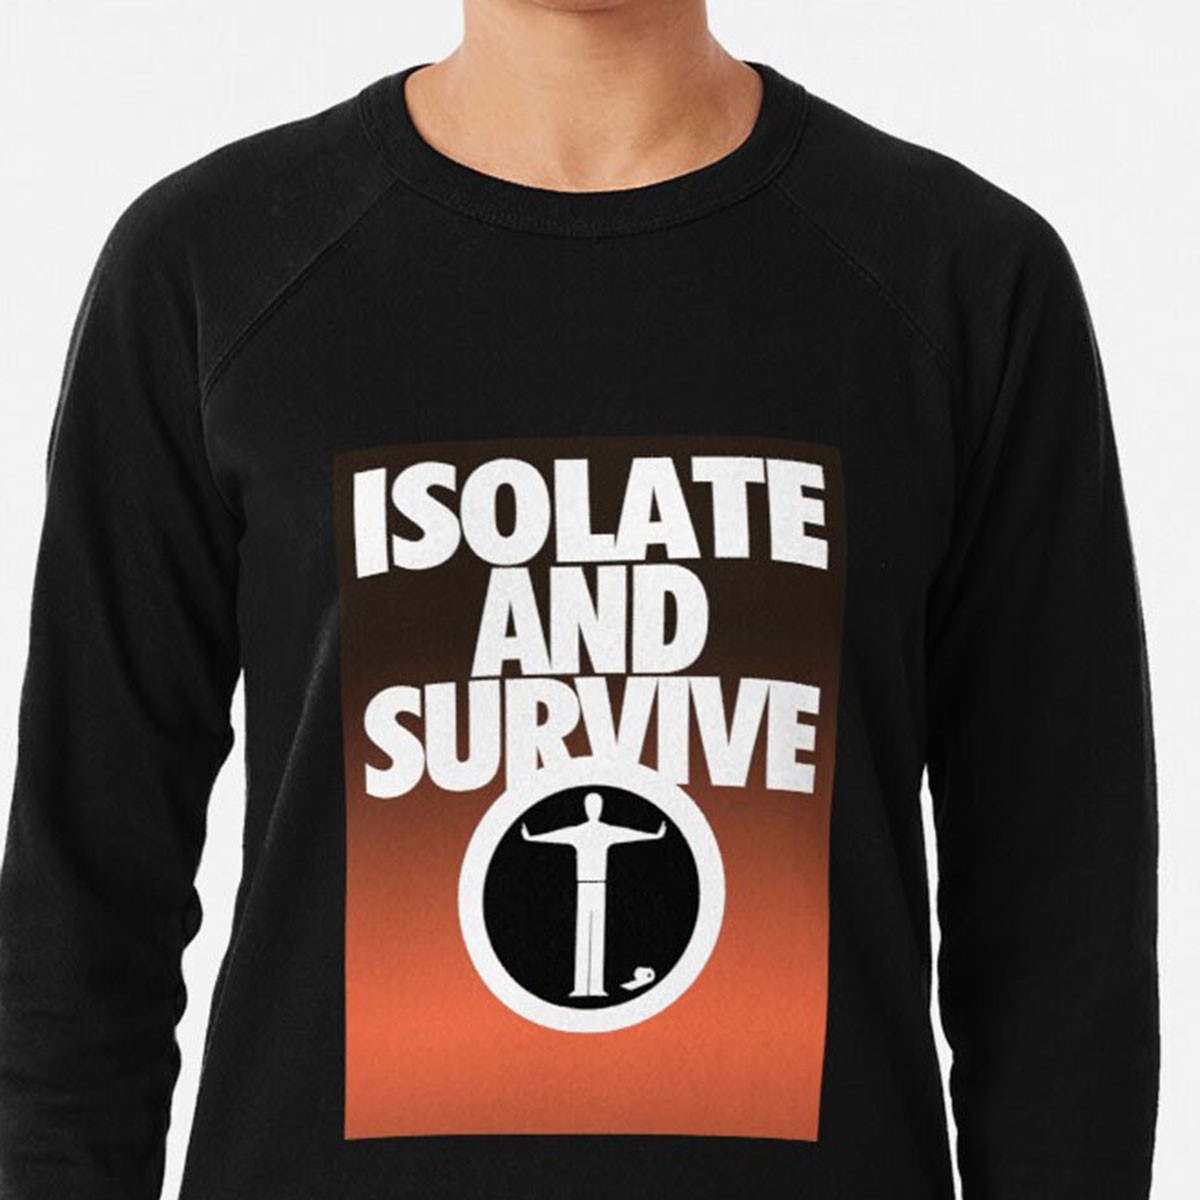 Isolate and Survive - practice social distancing lightweight sweatshirt by NTK Apparel